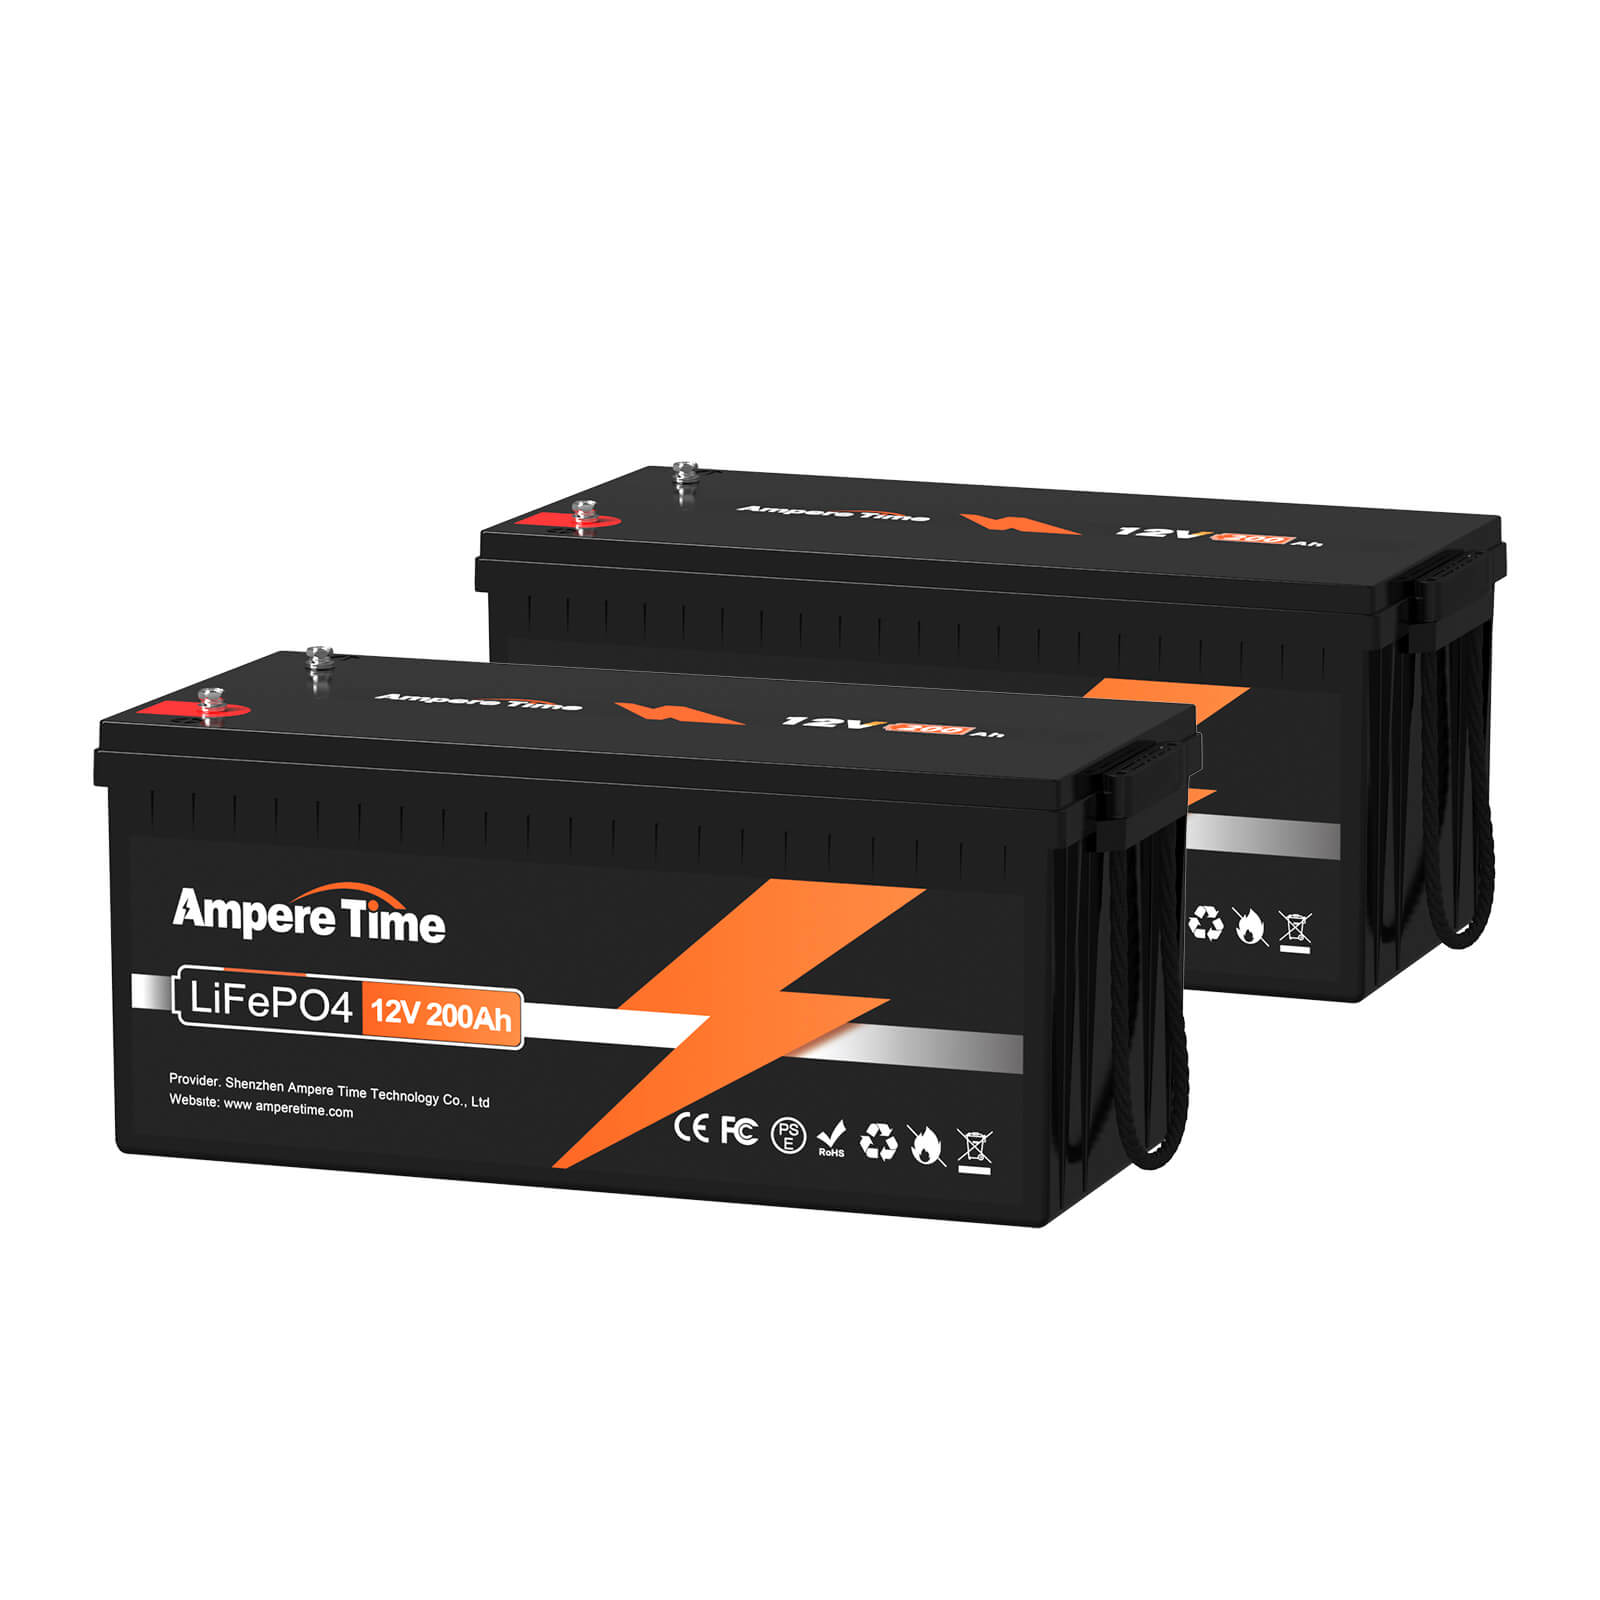 Ampere Time 12V 200Ah (100A BMS), 2560Wh LiFePO4 Battery with 4000+ Discharge Cycles